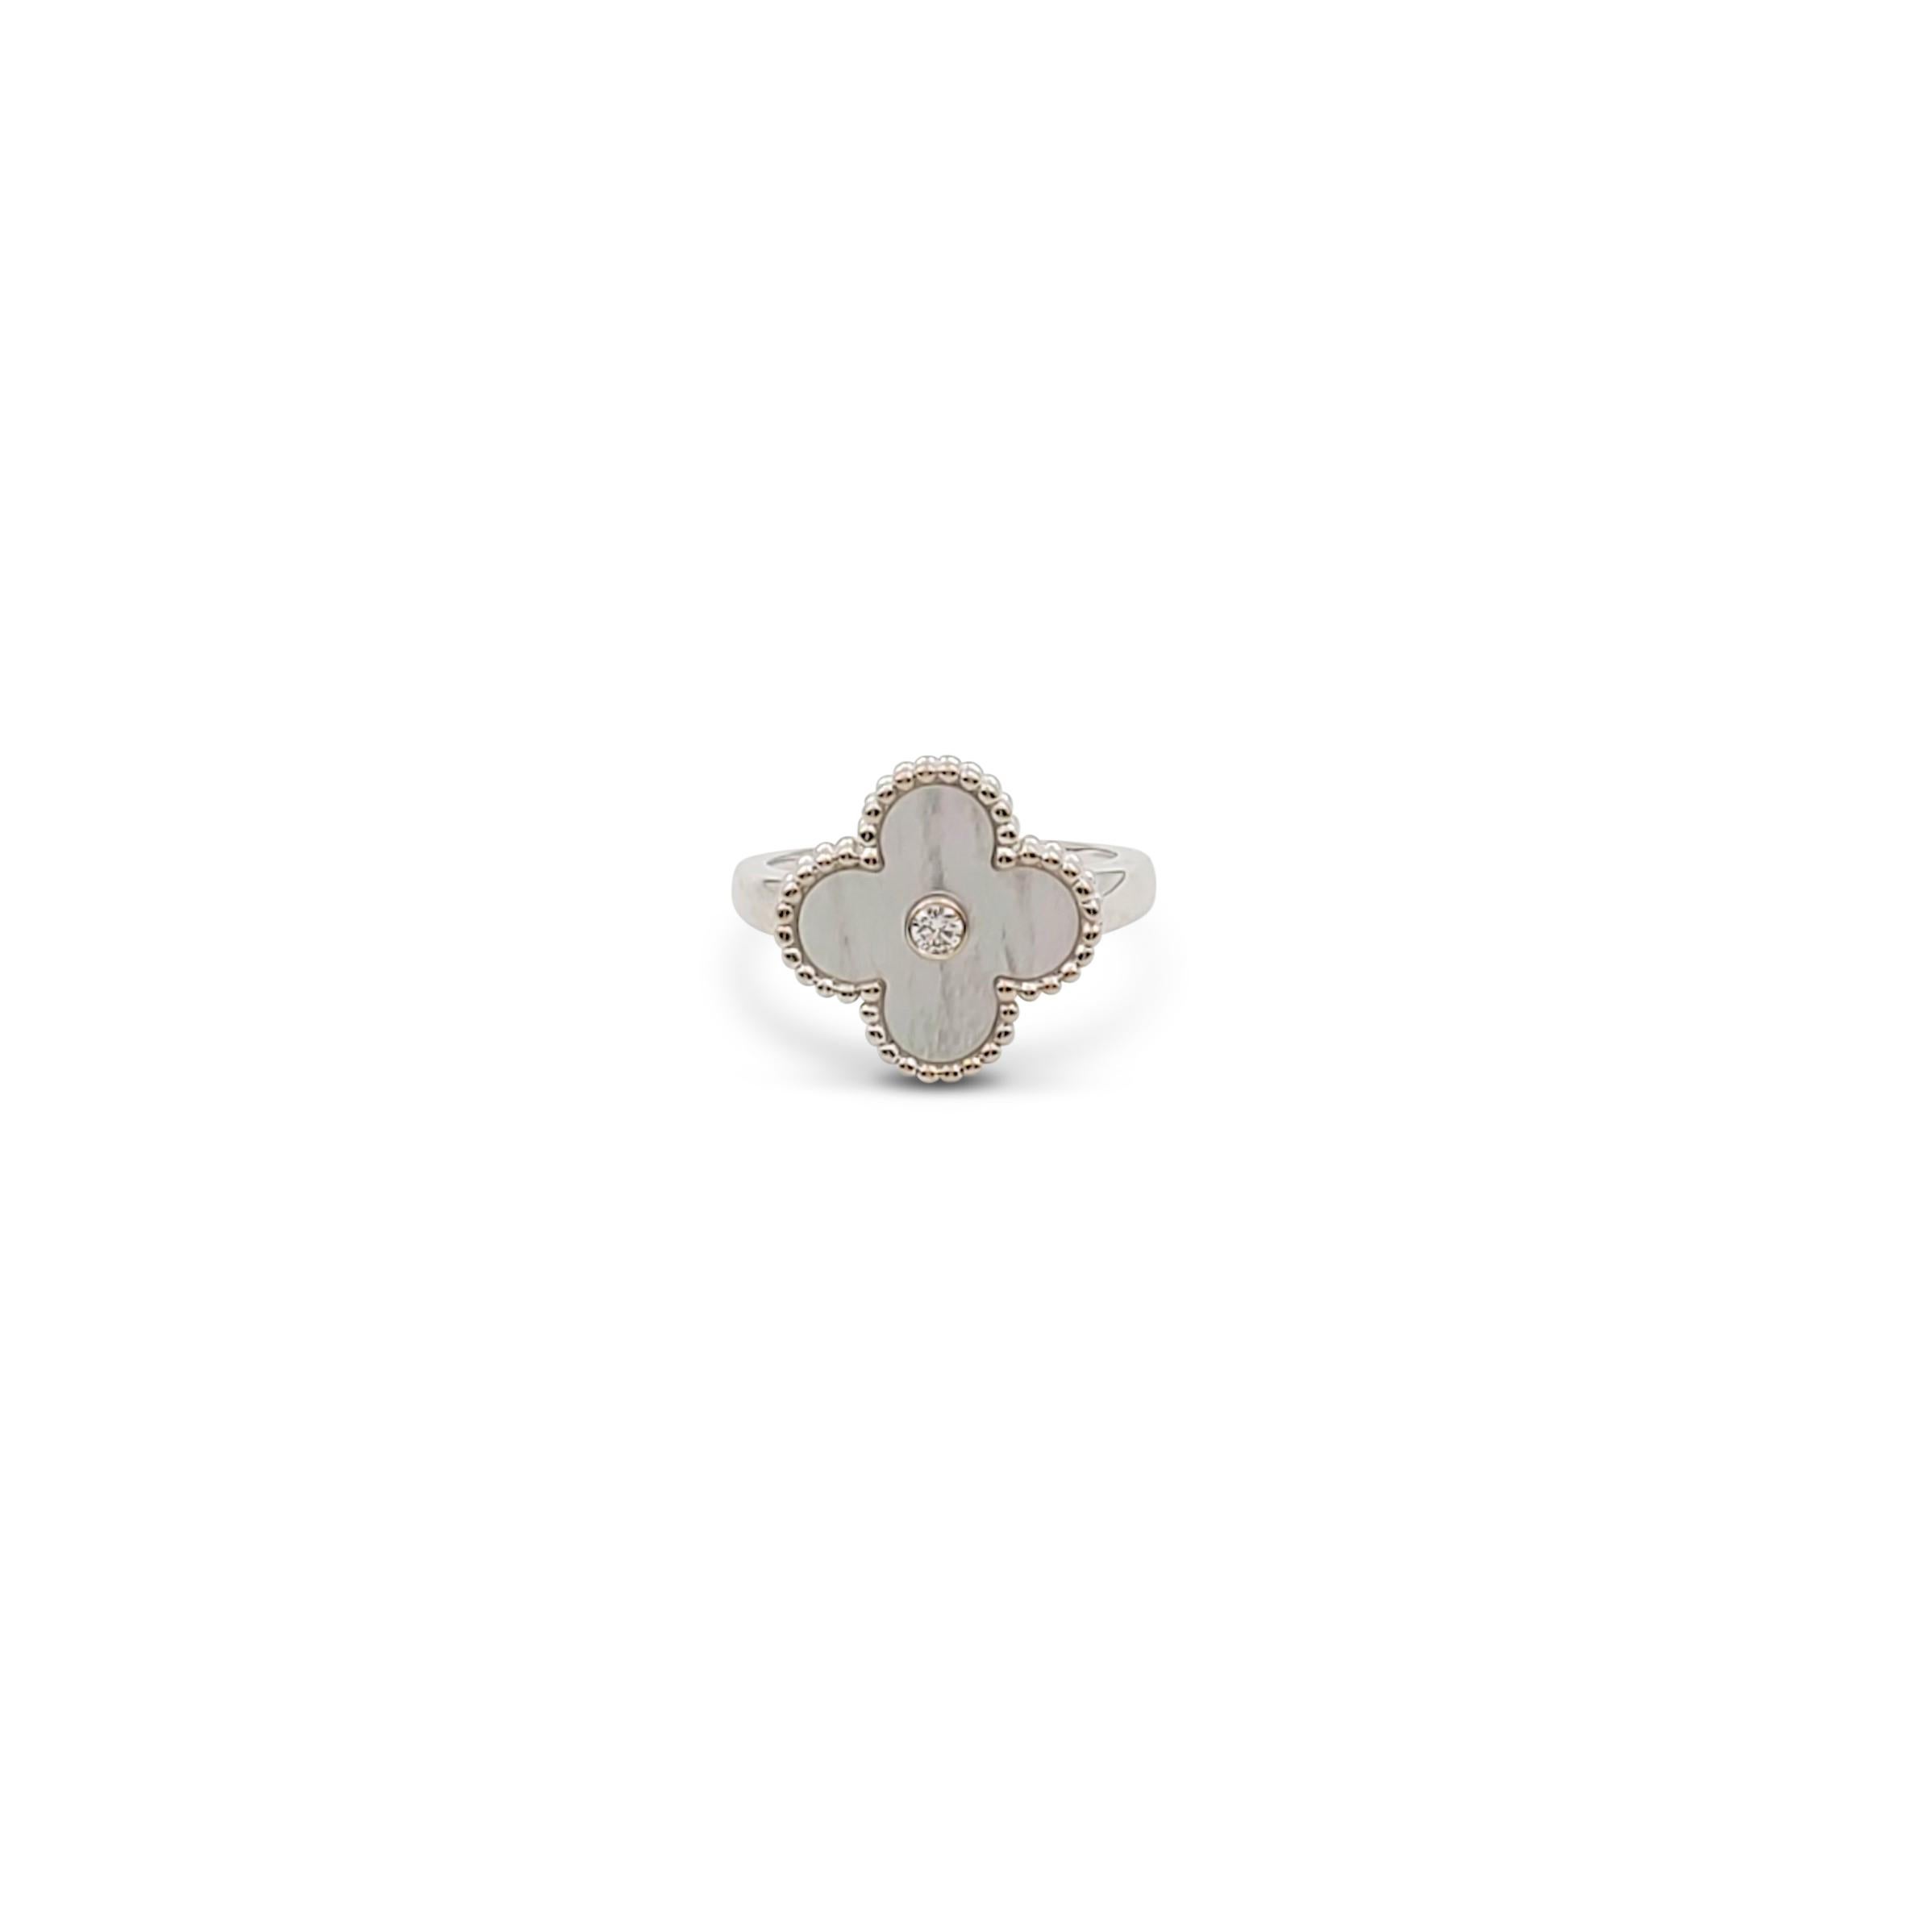 Authentic Van Cleef & Arpels 'Vintage Alhambra' ring crafted in 18 karat white gold centers on a clover motif in mother-of-pearl set with a round brilliant cut diamond center weighing an estimated 0.06 carats (E-F color, VS clarity). Signed VCA,